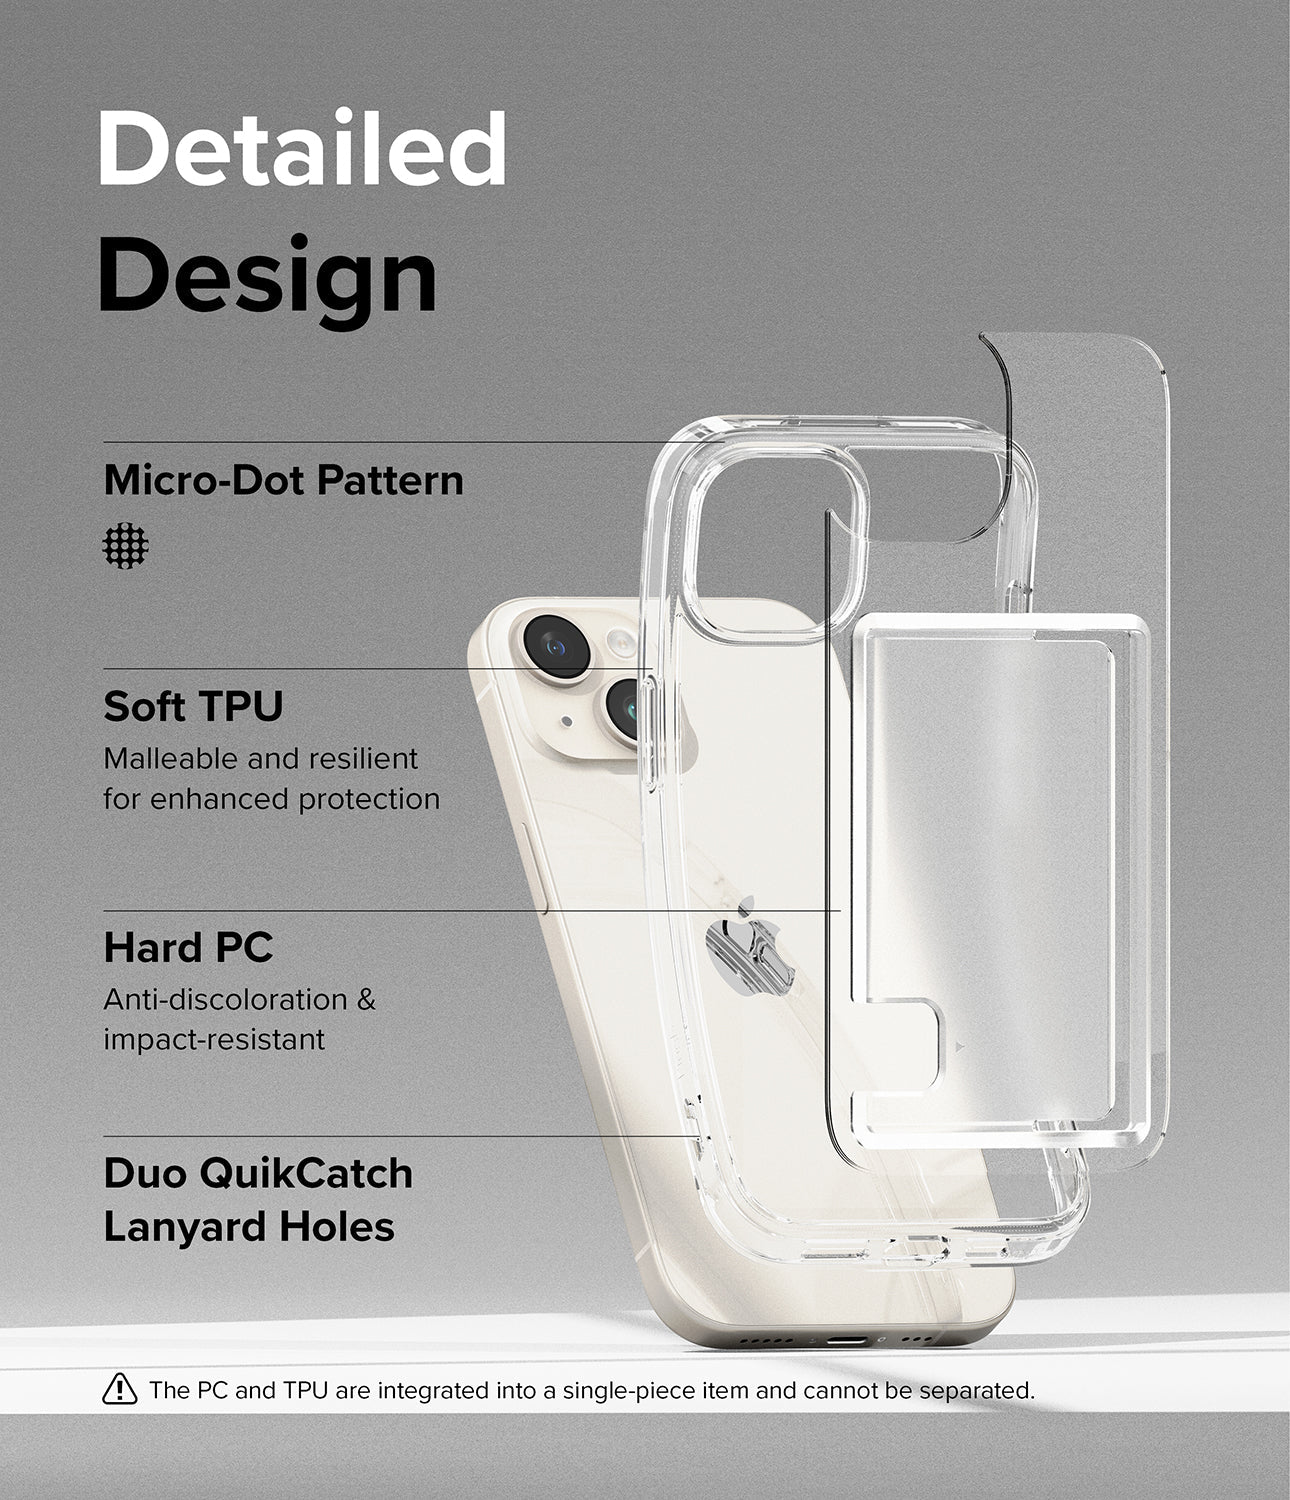 iPhone 15 Plus Case | Fusion Card - Detailed Design. Micro-Dot Pattern. Soft TPU. Malleable and resilient for enhanced protection. Hard PC. Anti-Discoloration and impact-resistant. Duo QuikCatch Lanyard Holes.